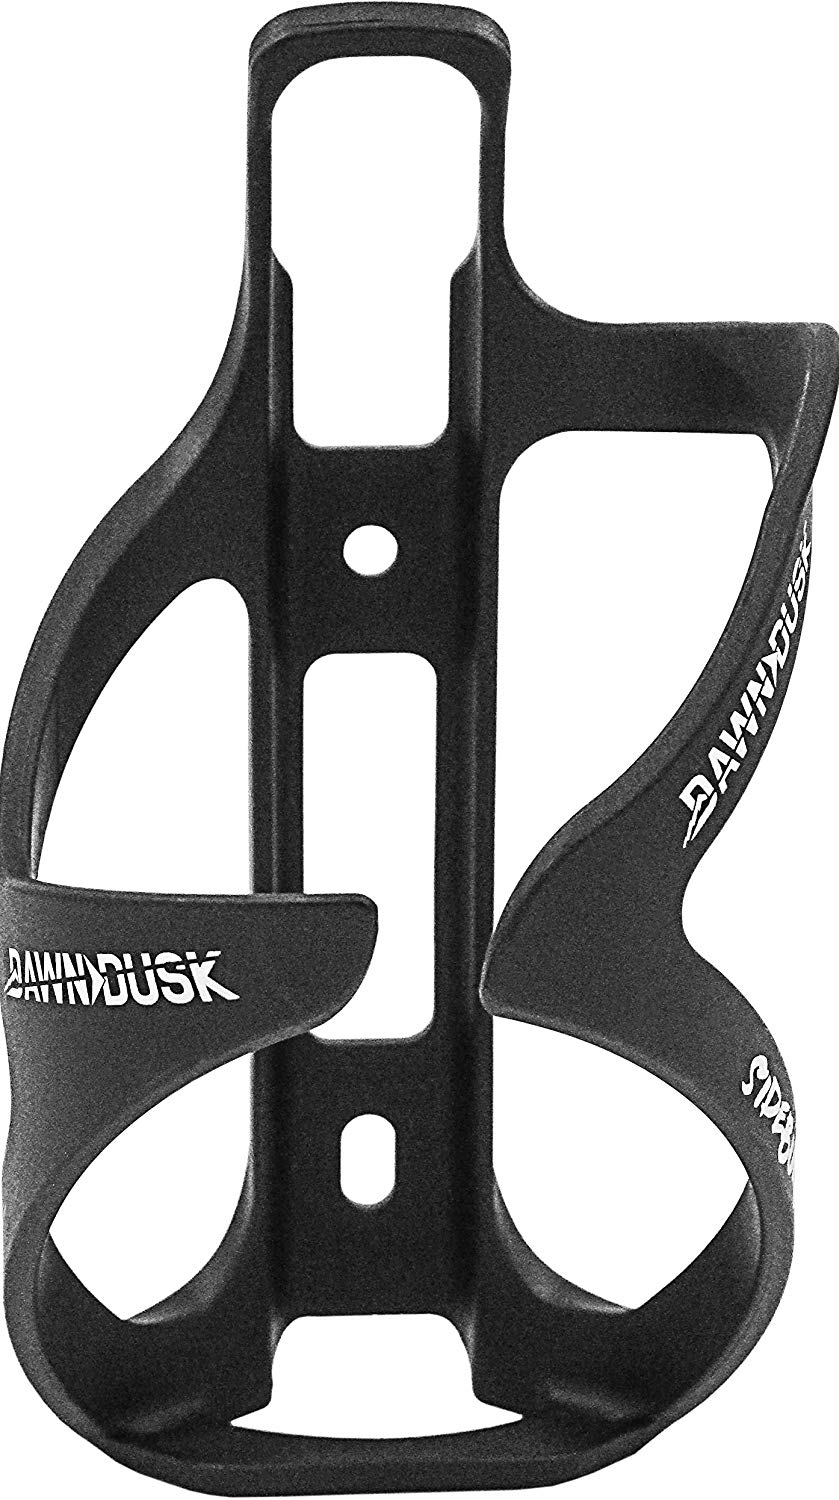 Sideburn 6 Water Bottle Cage for Gravel and Mountain Bikes (Left)